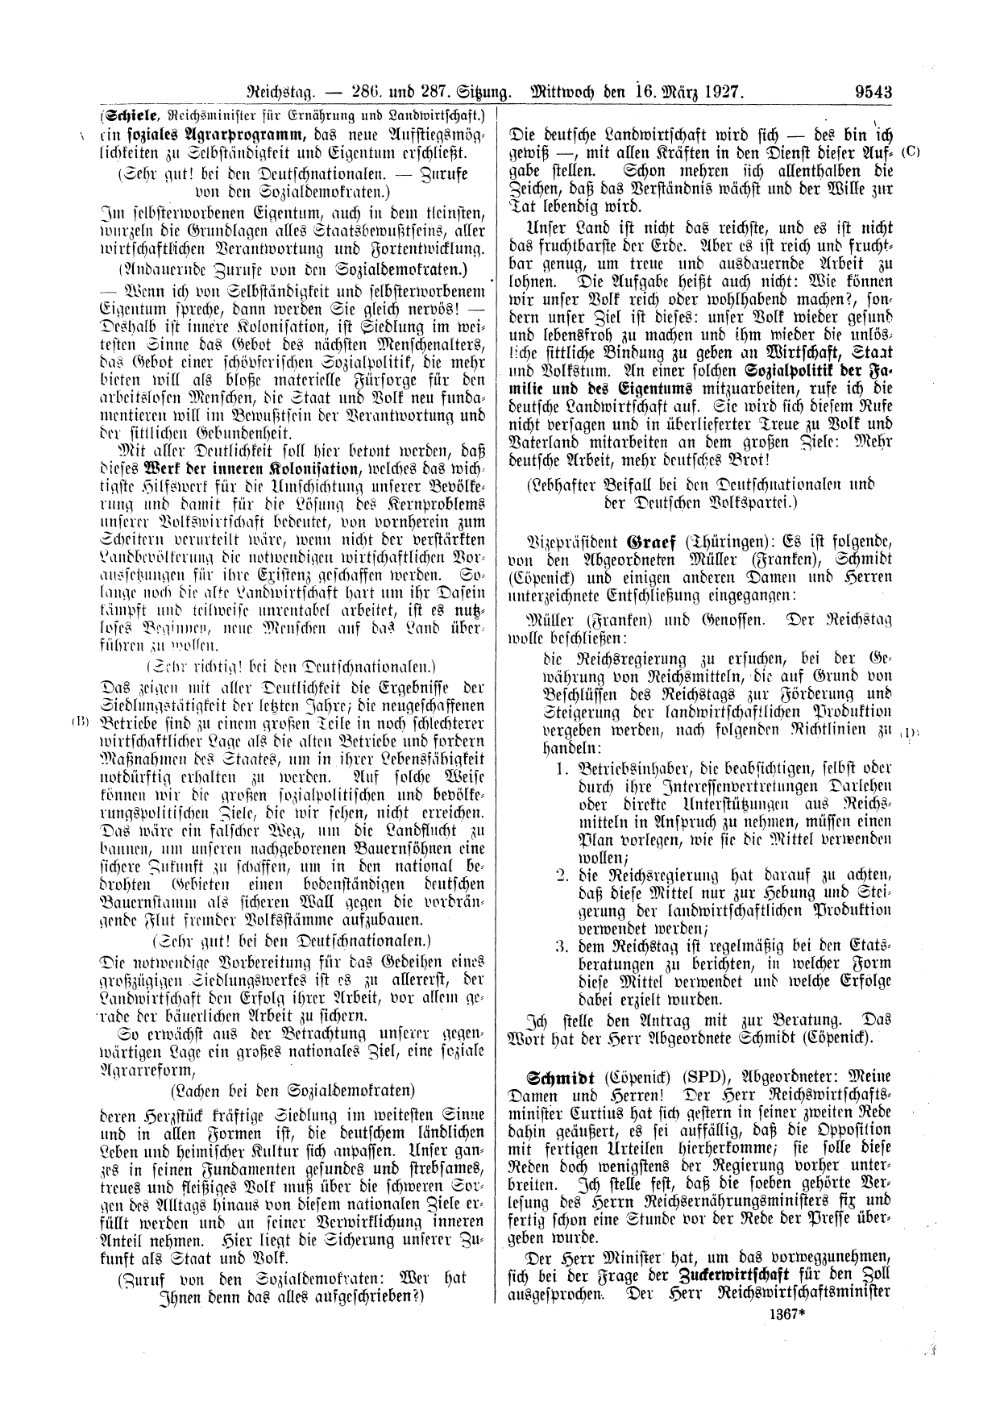 Scan of page 9543